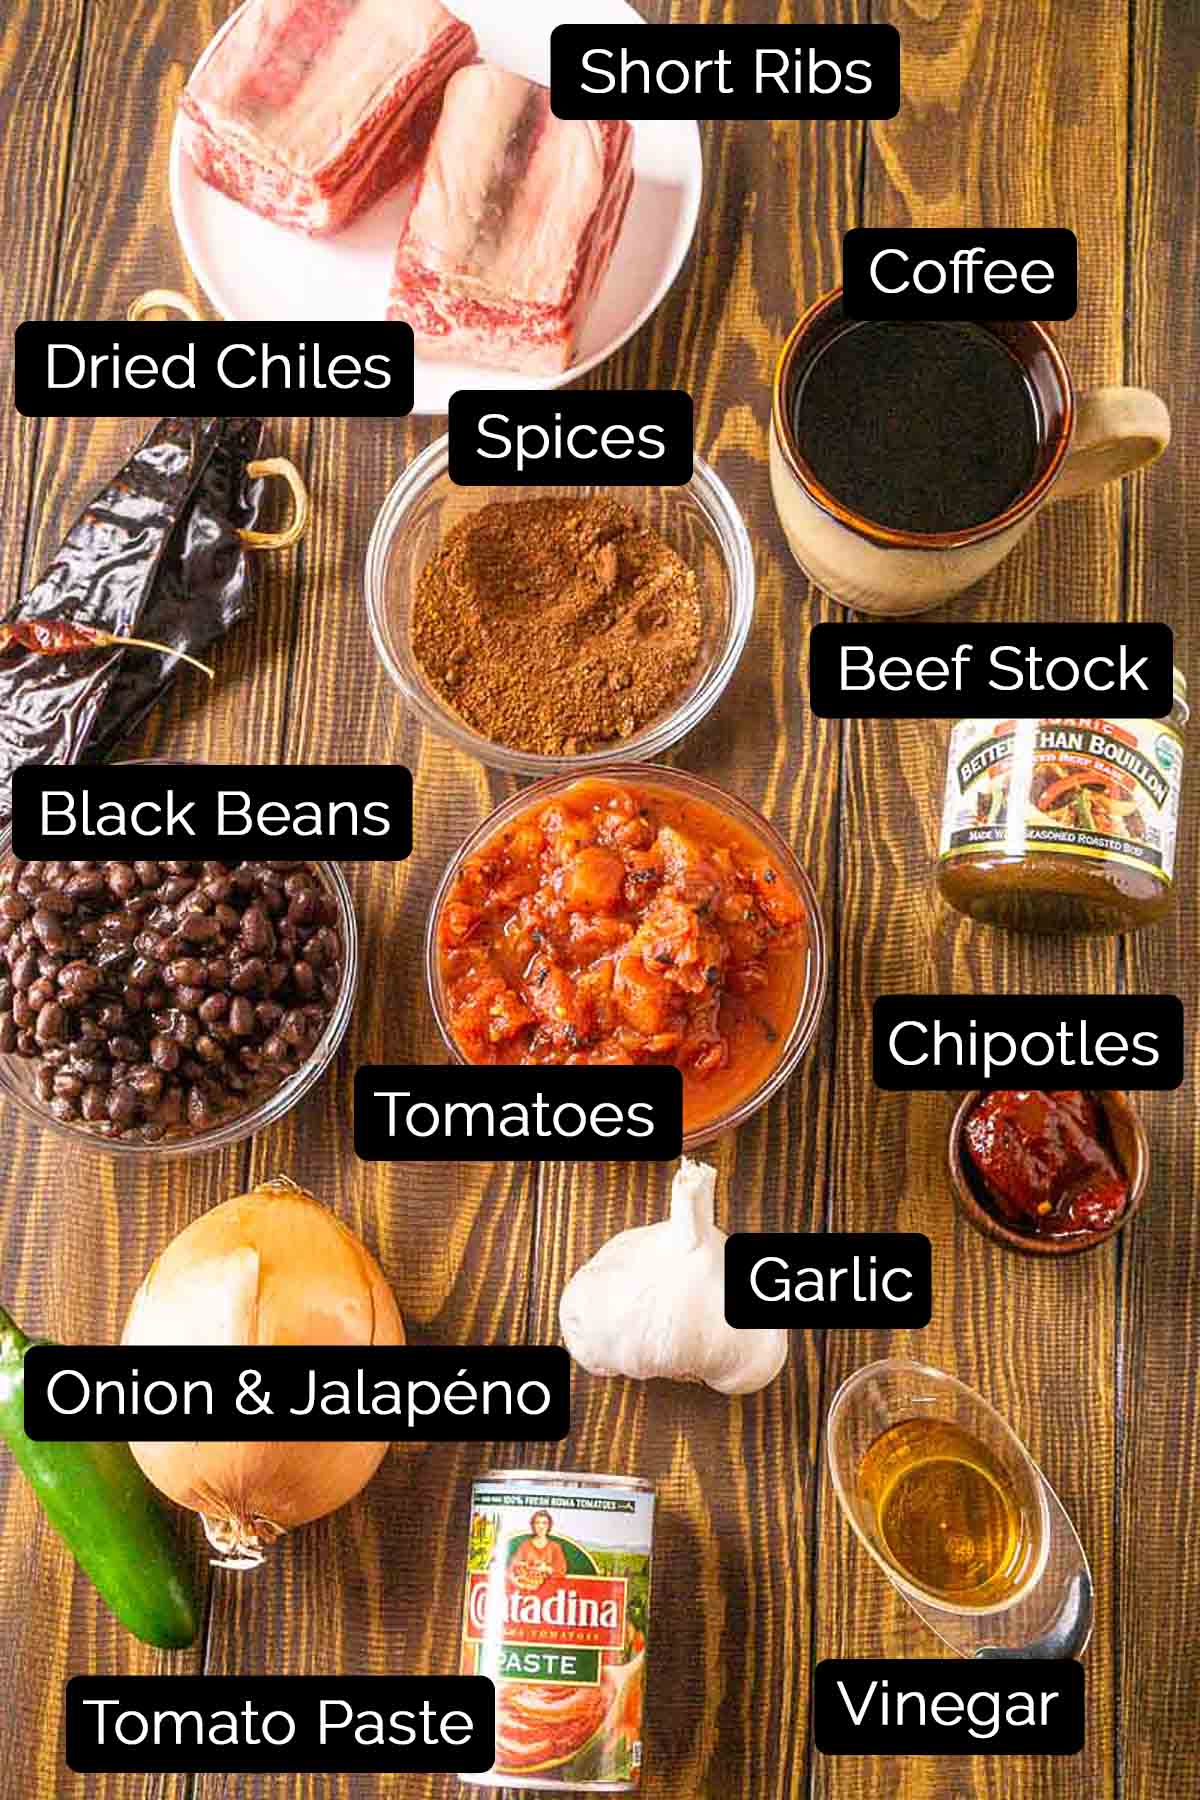 The short rib chili ingredients with black and white labels on a wooden surface.